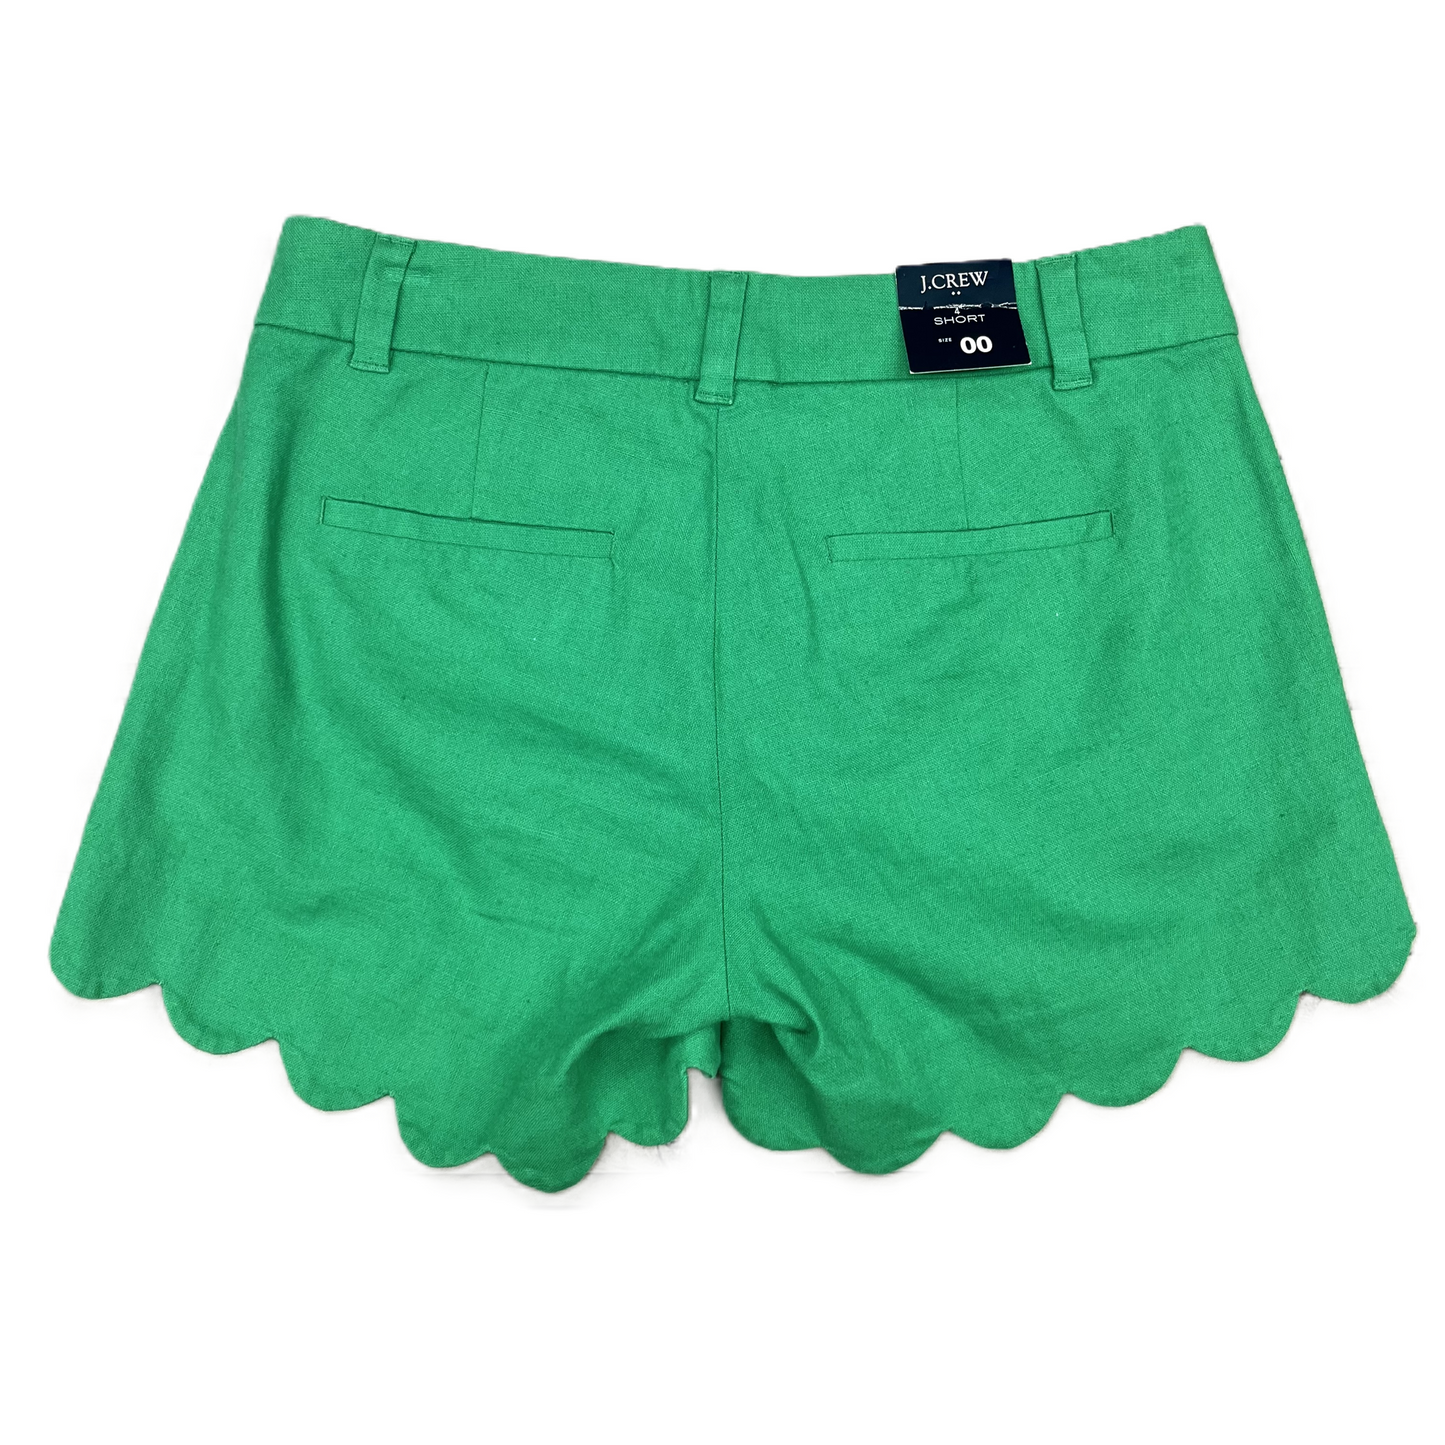 Shorts By J. Crew  Size: 00